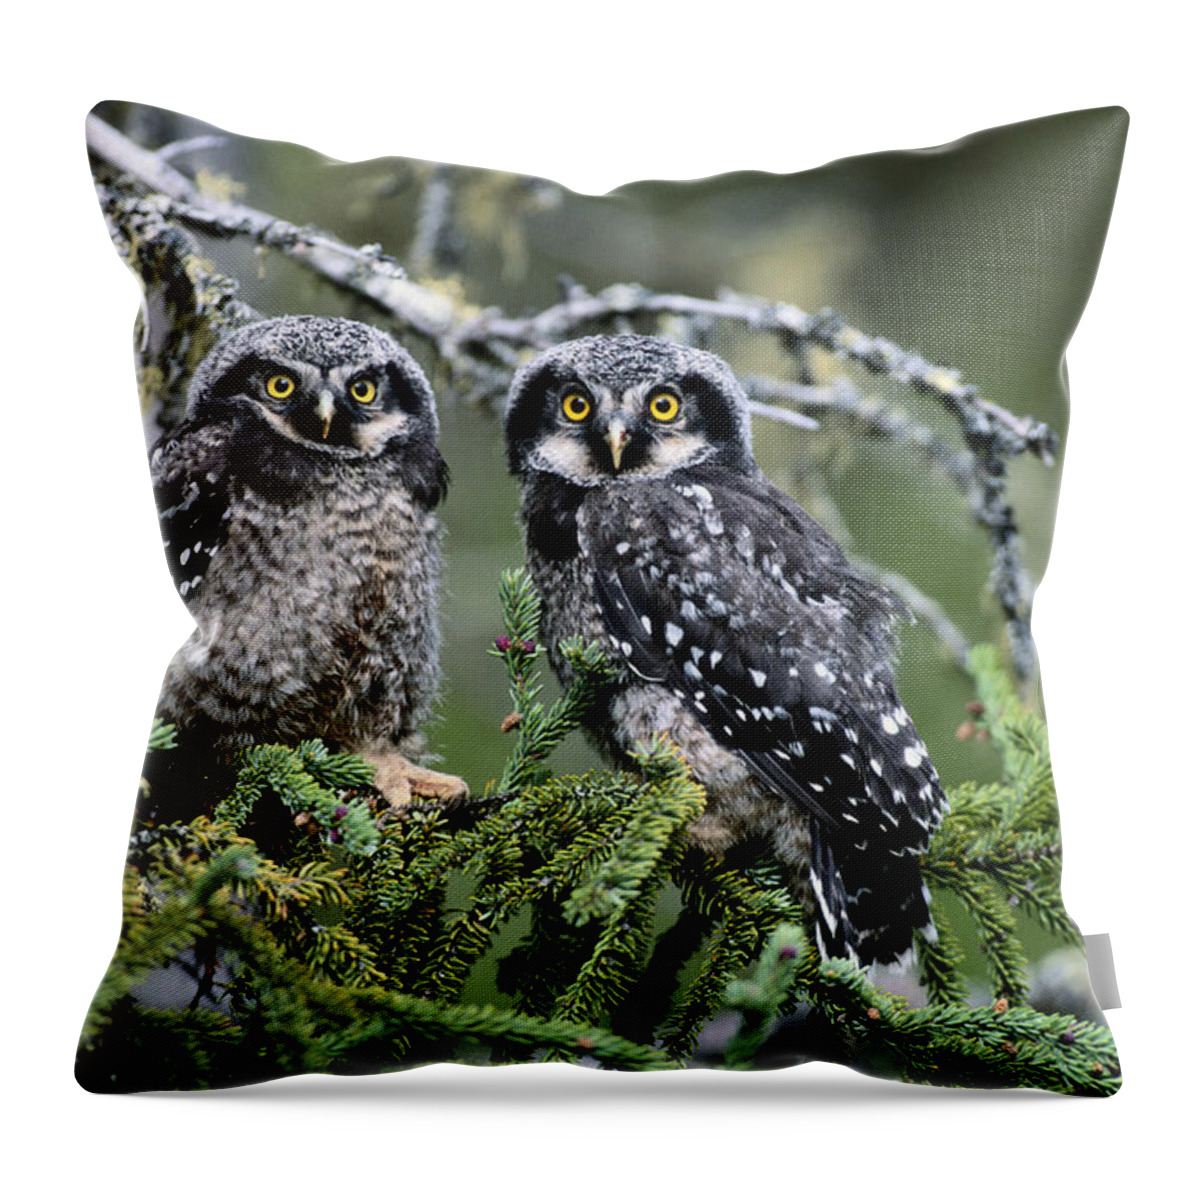 Animal Themes Throw Pillow featuring the photograph Two Hawk Owls Surnia Ulula On Tree by Art Wolfe